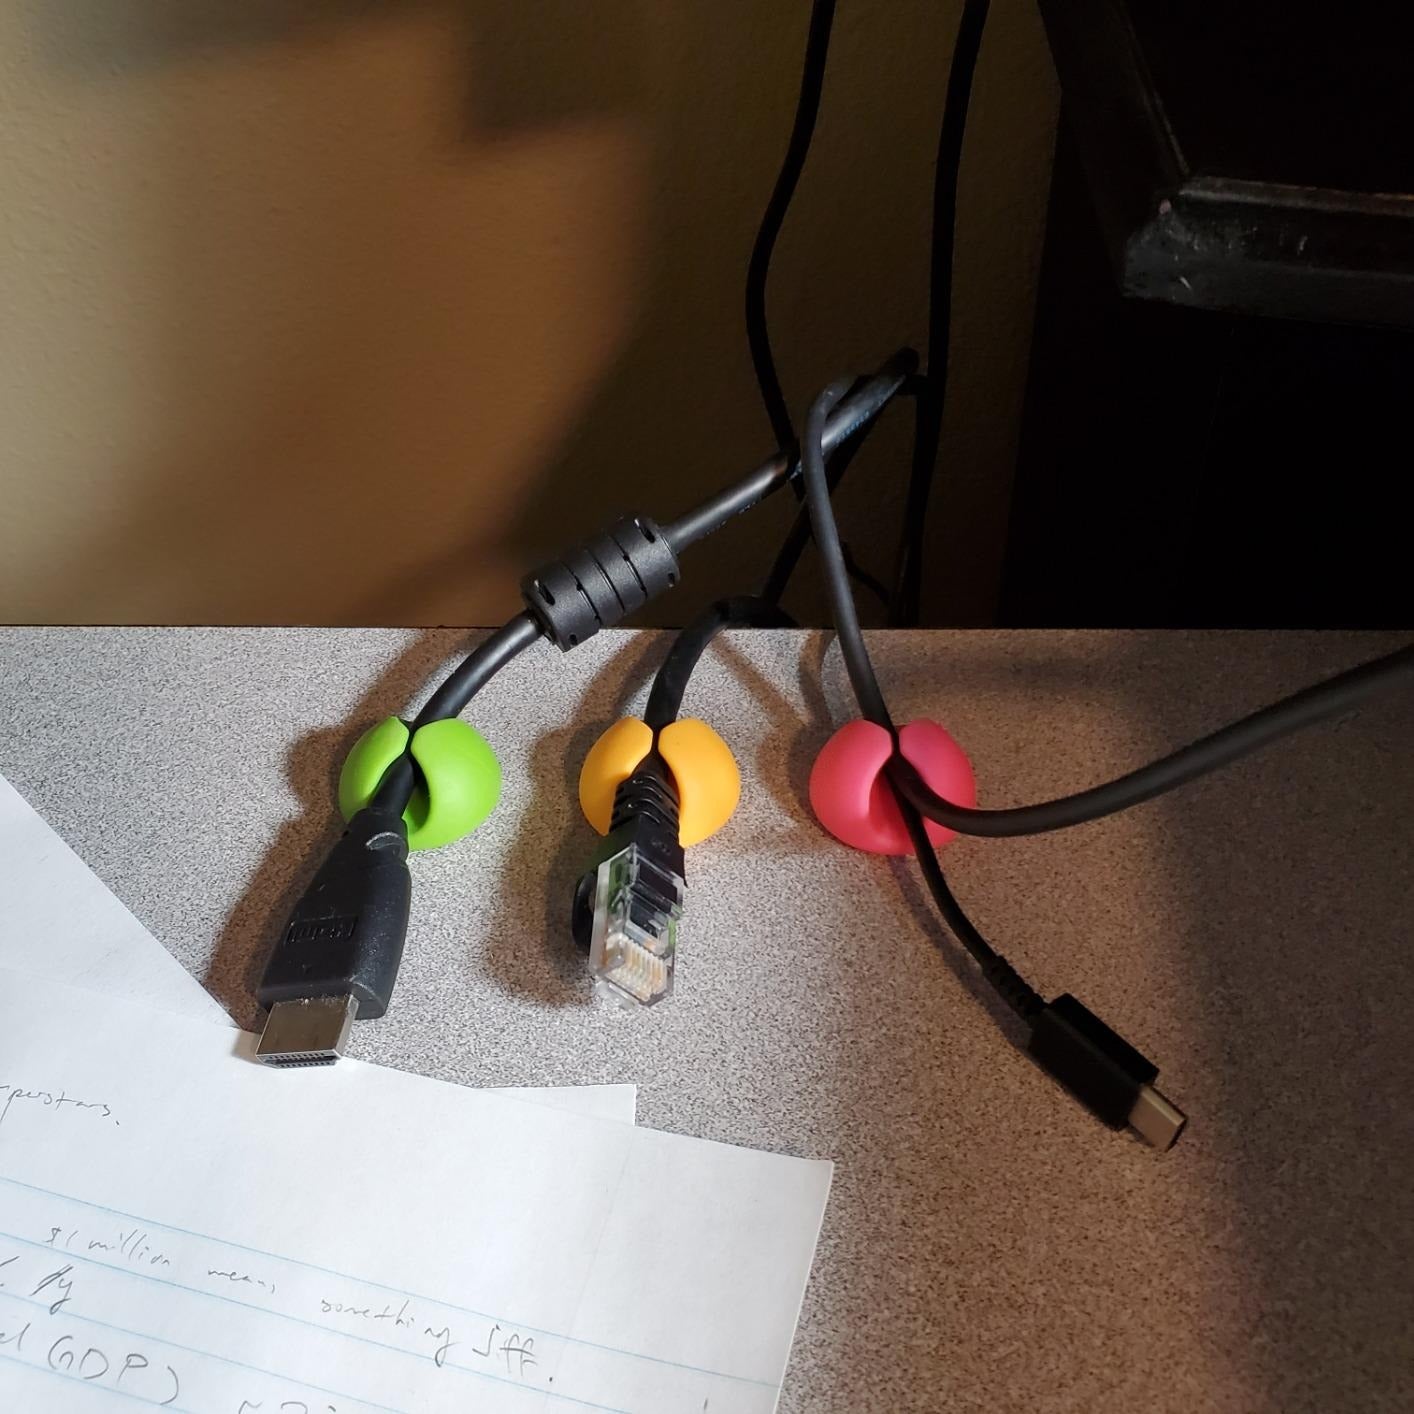 reviewer image of charging cables organized using the colorful cable clips